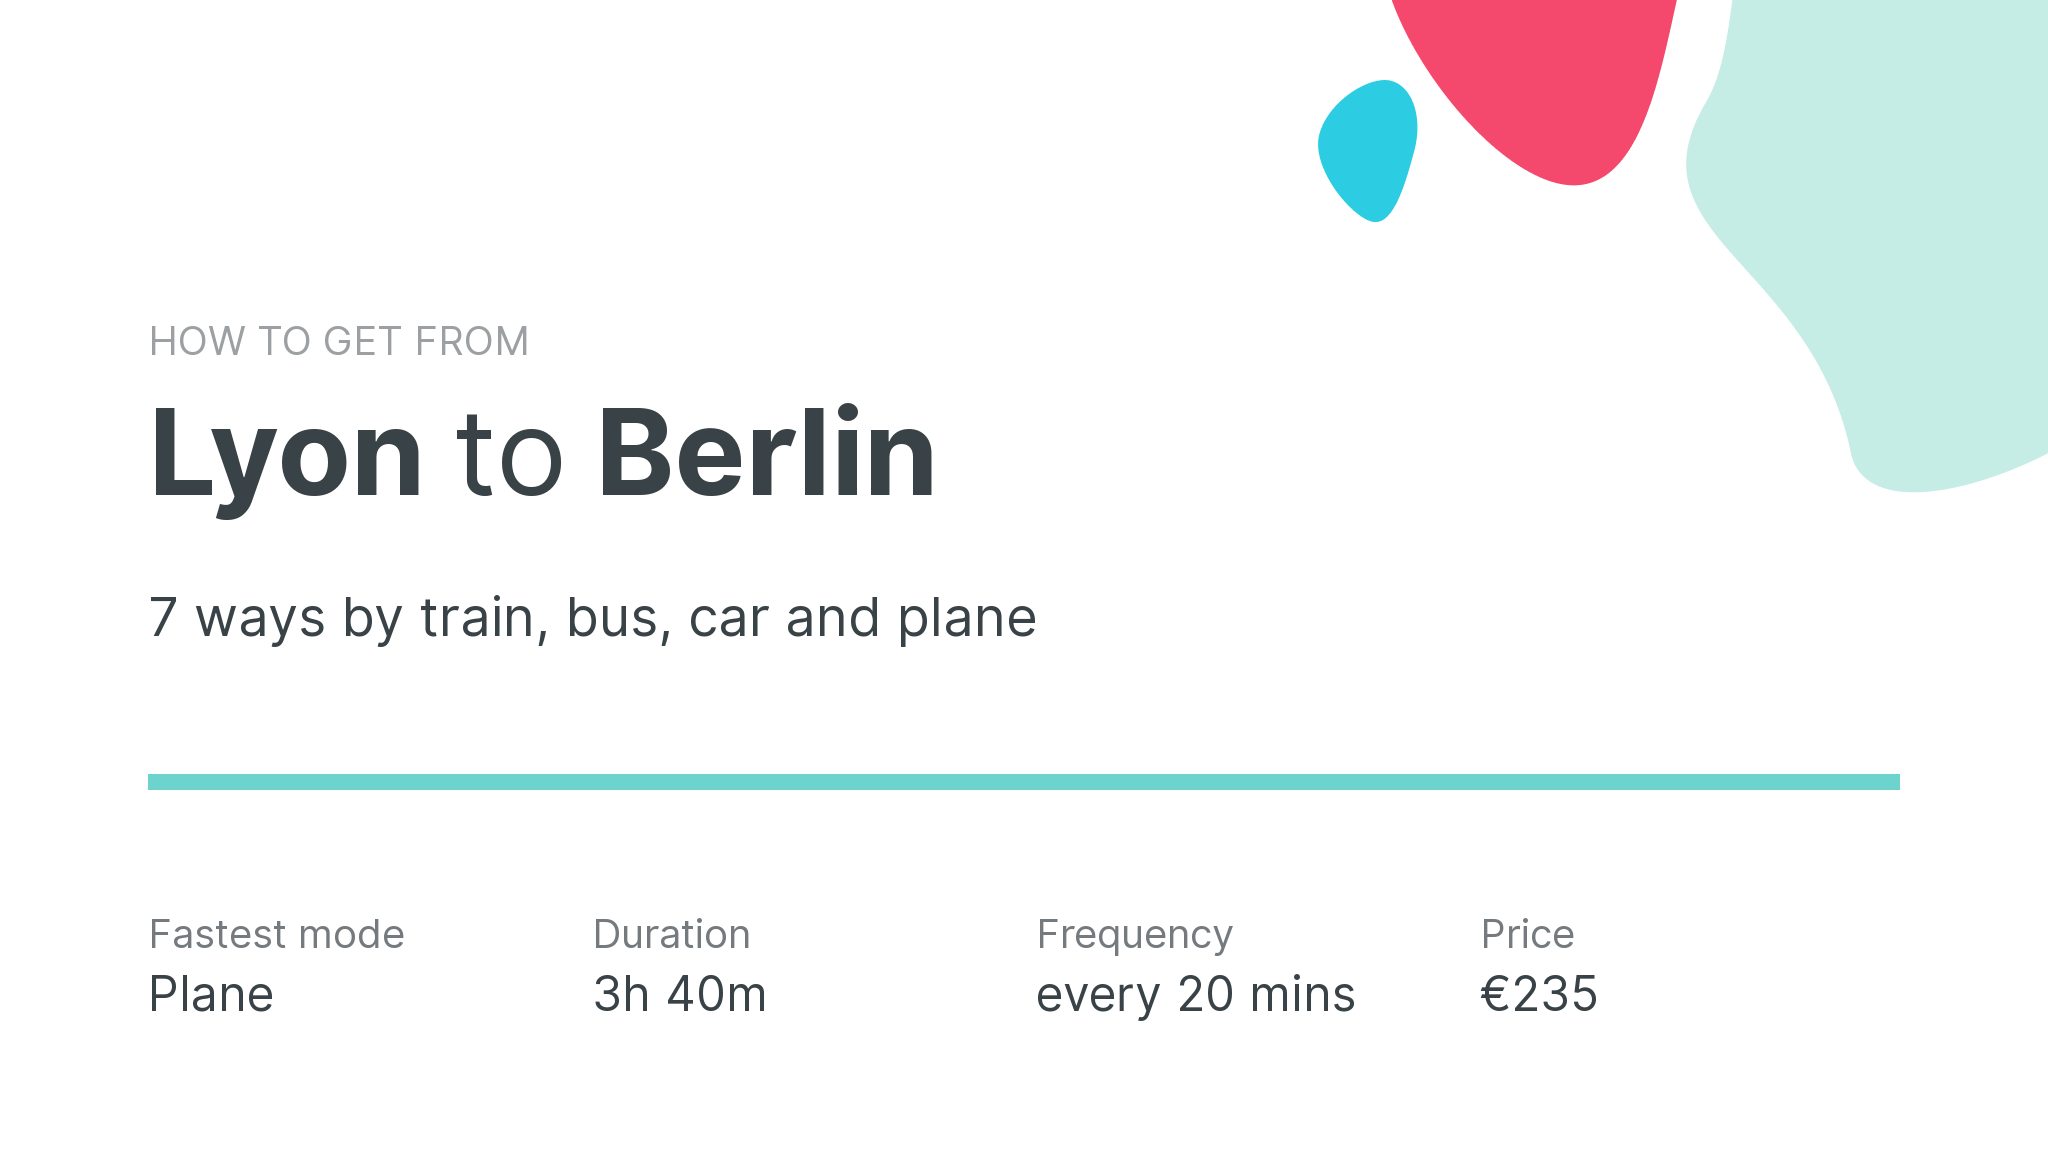 How do I get from Lyon to Berlin